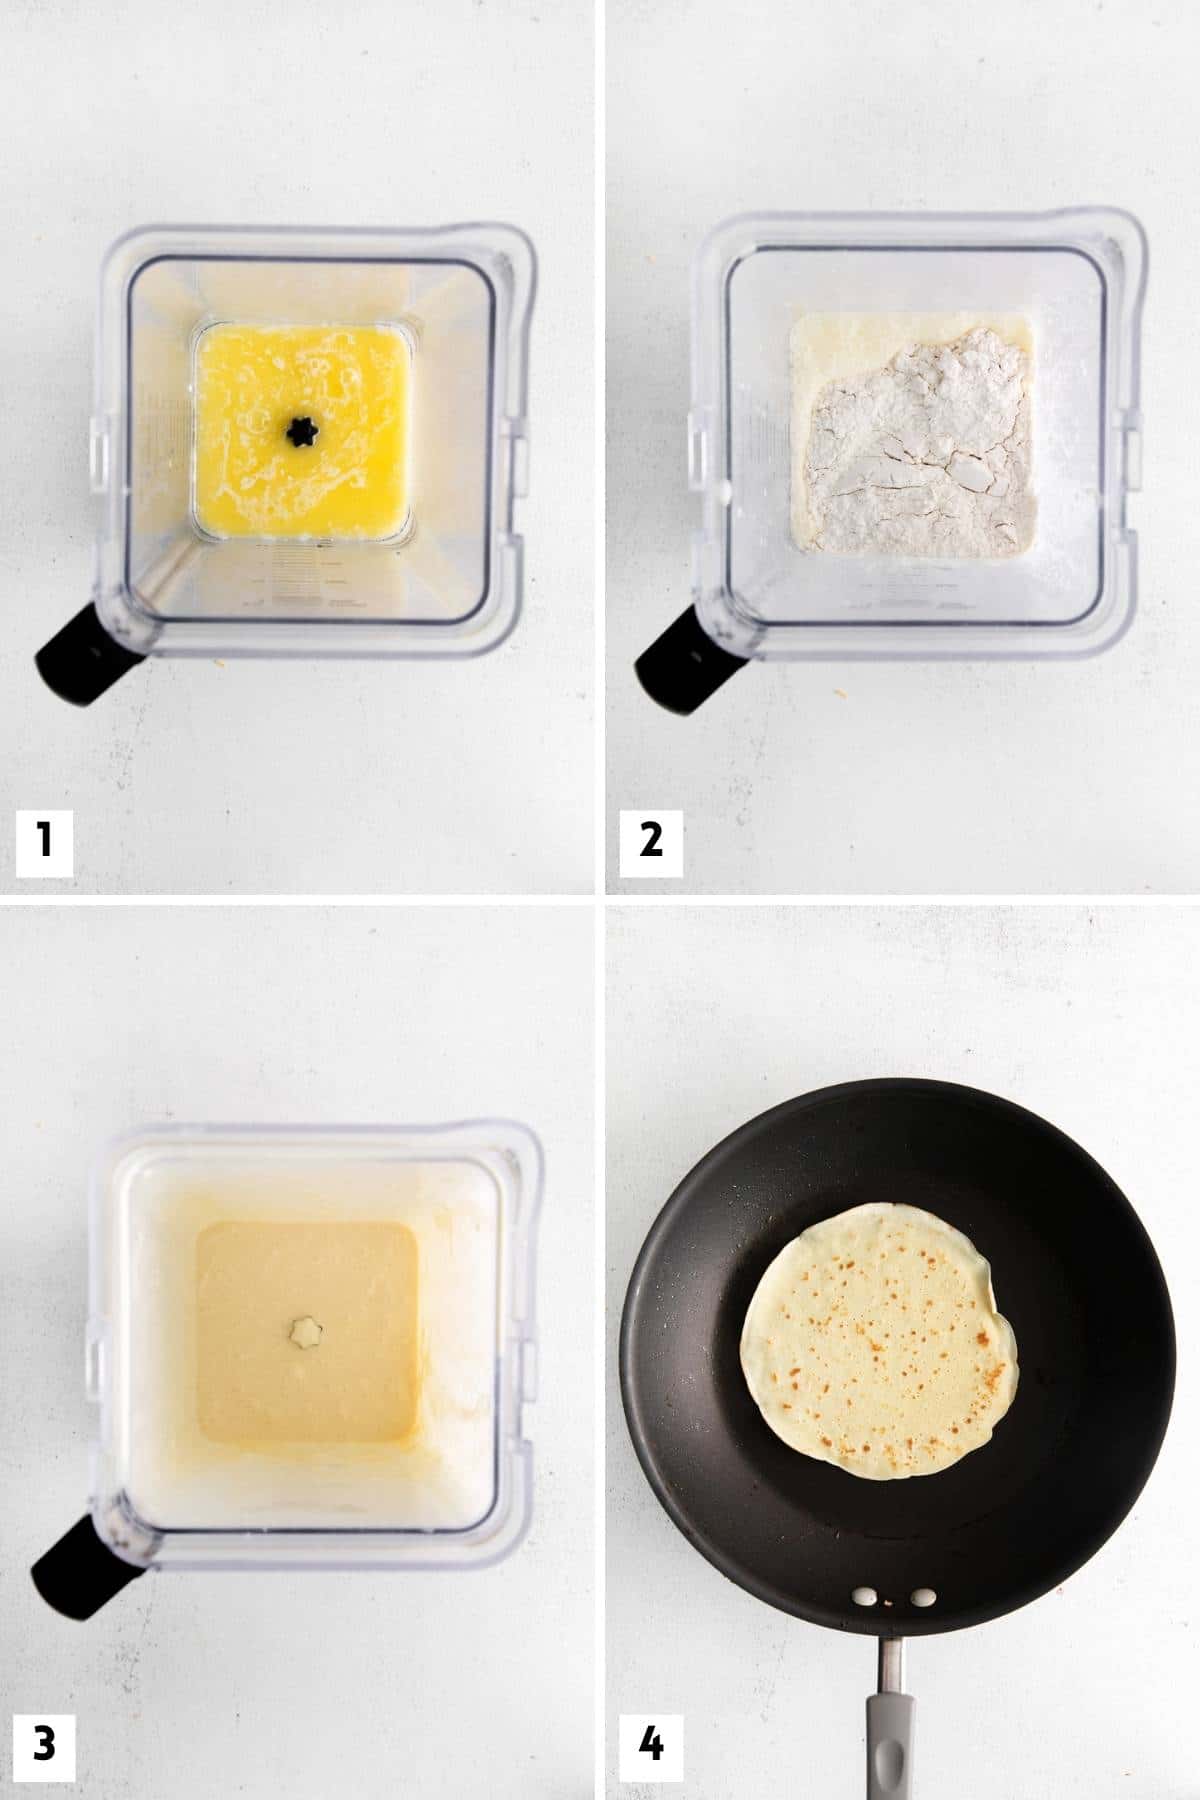 Steps for making French crepes